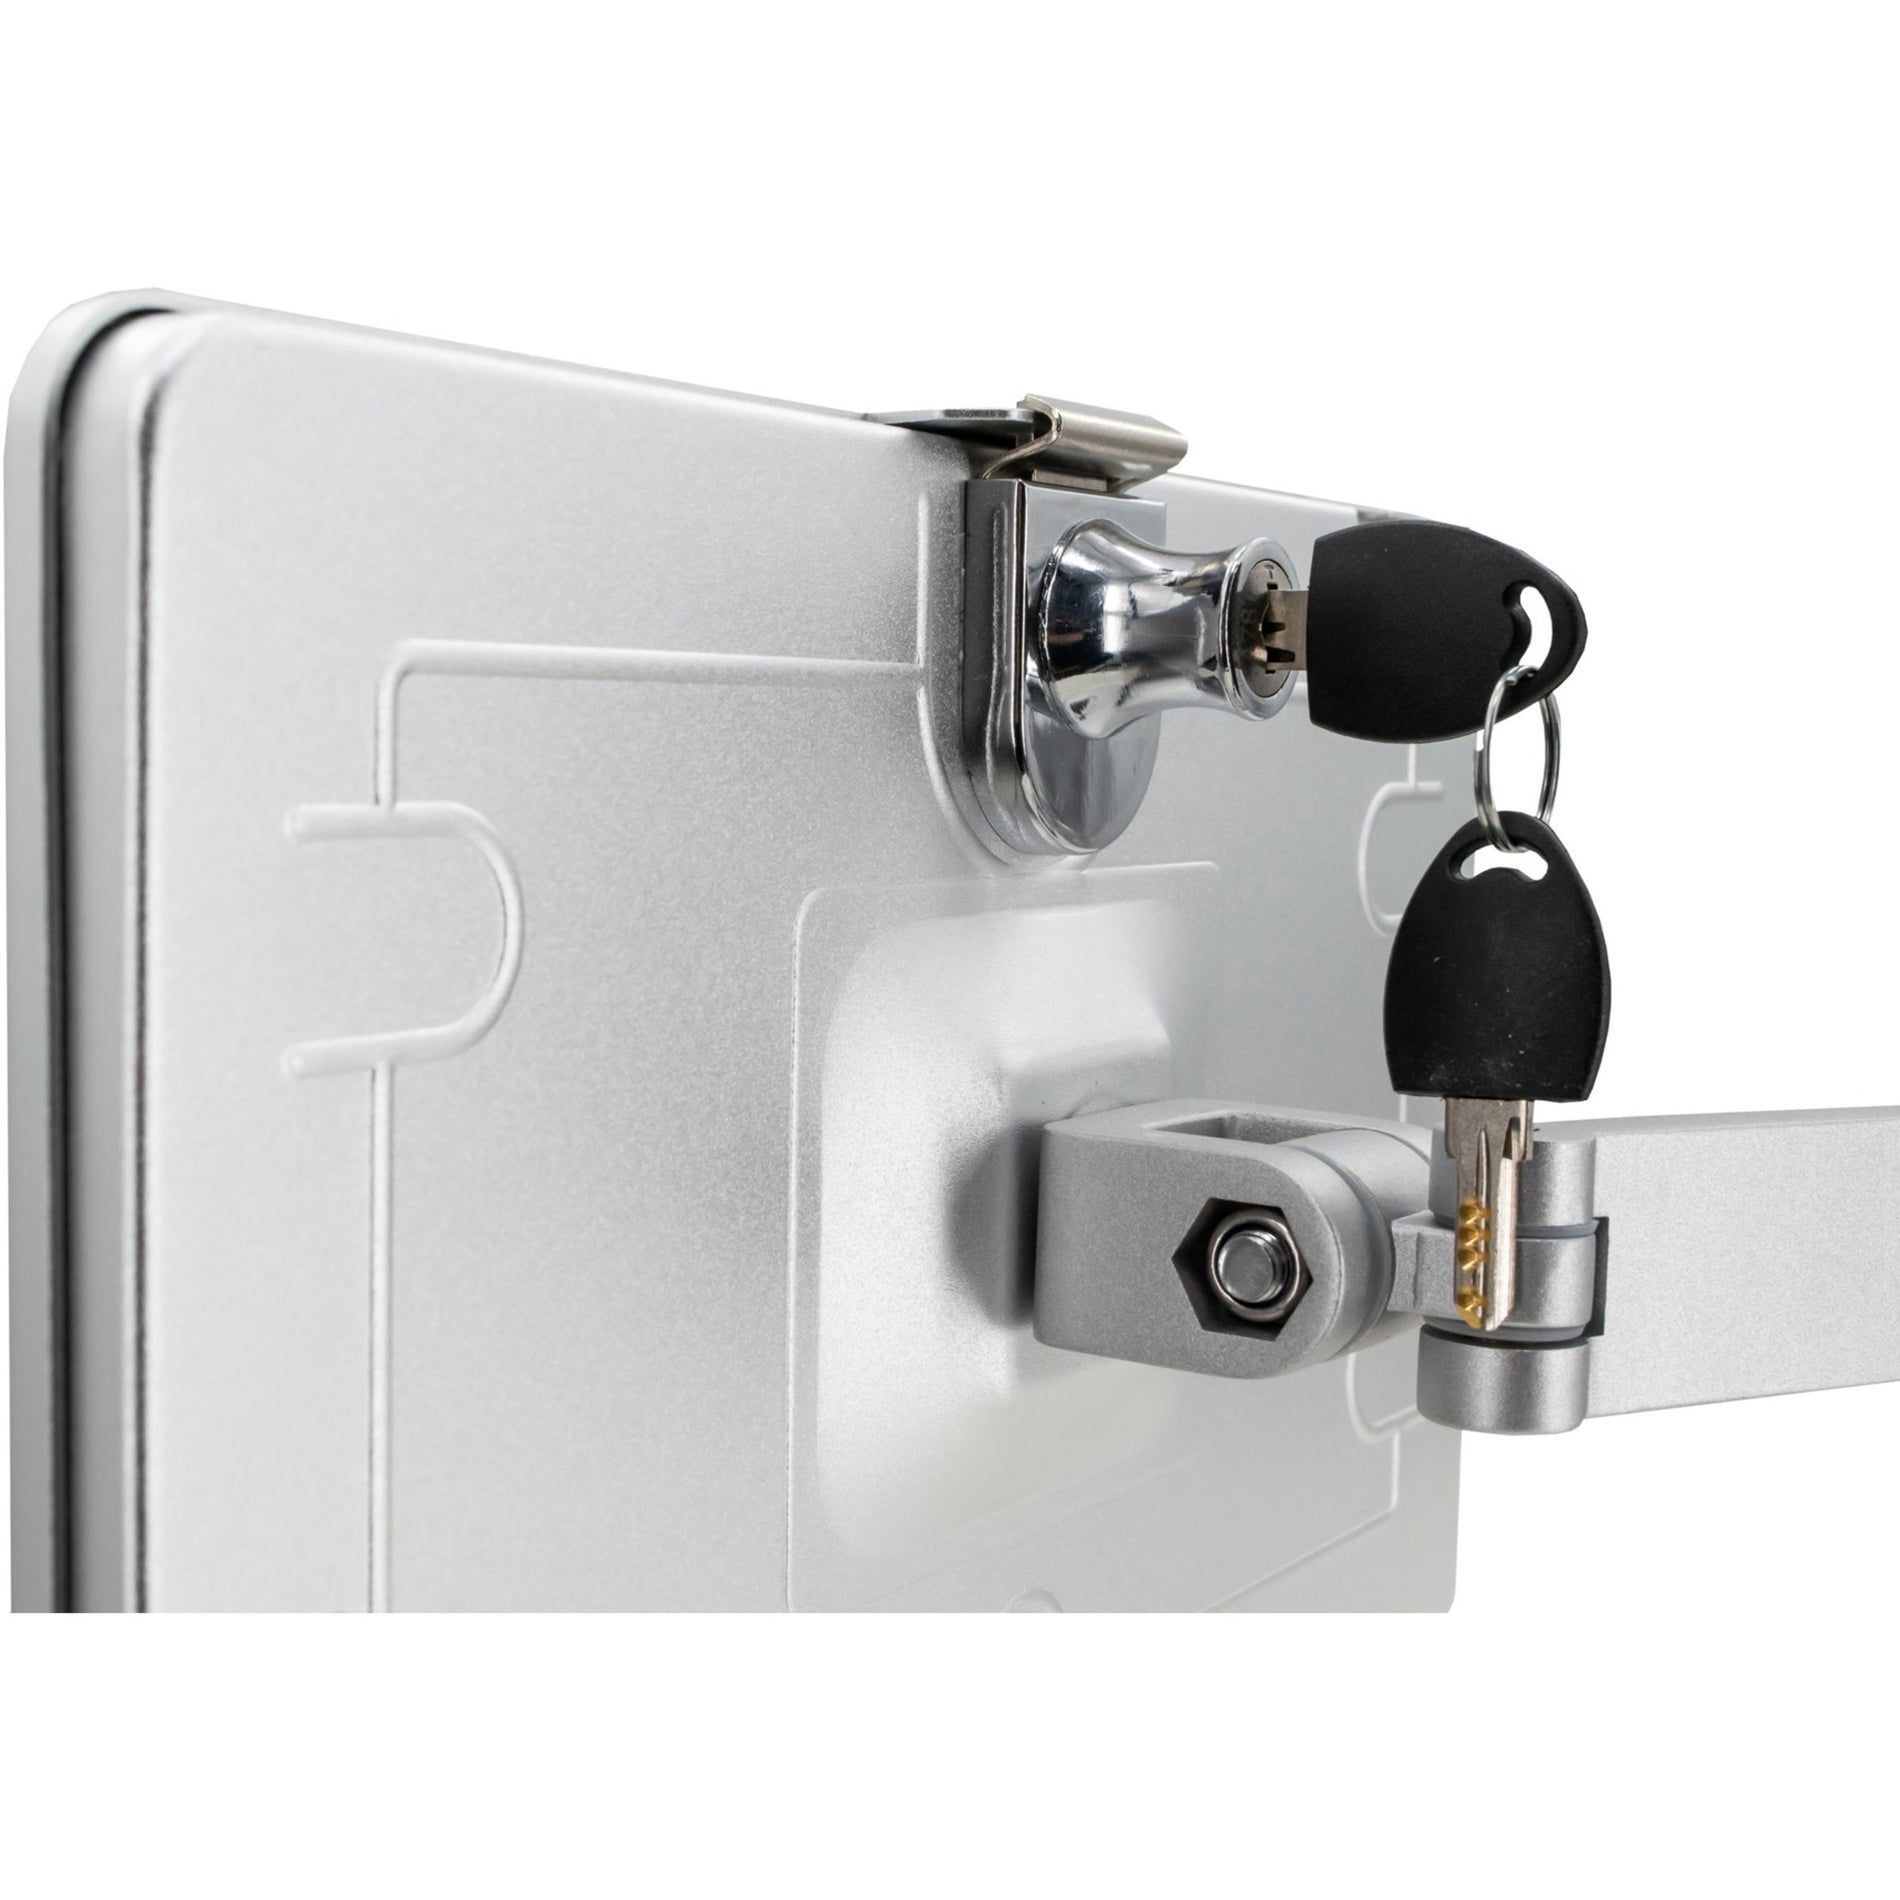 CTA Digital PAD-AWSEA10 Mounting Arm, Articulating Wall Mount for Tablets